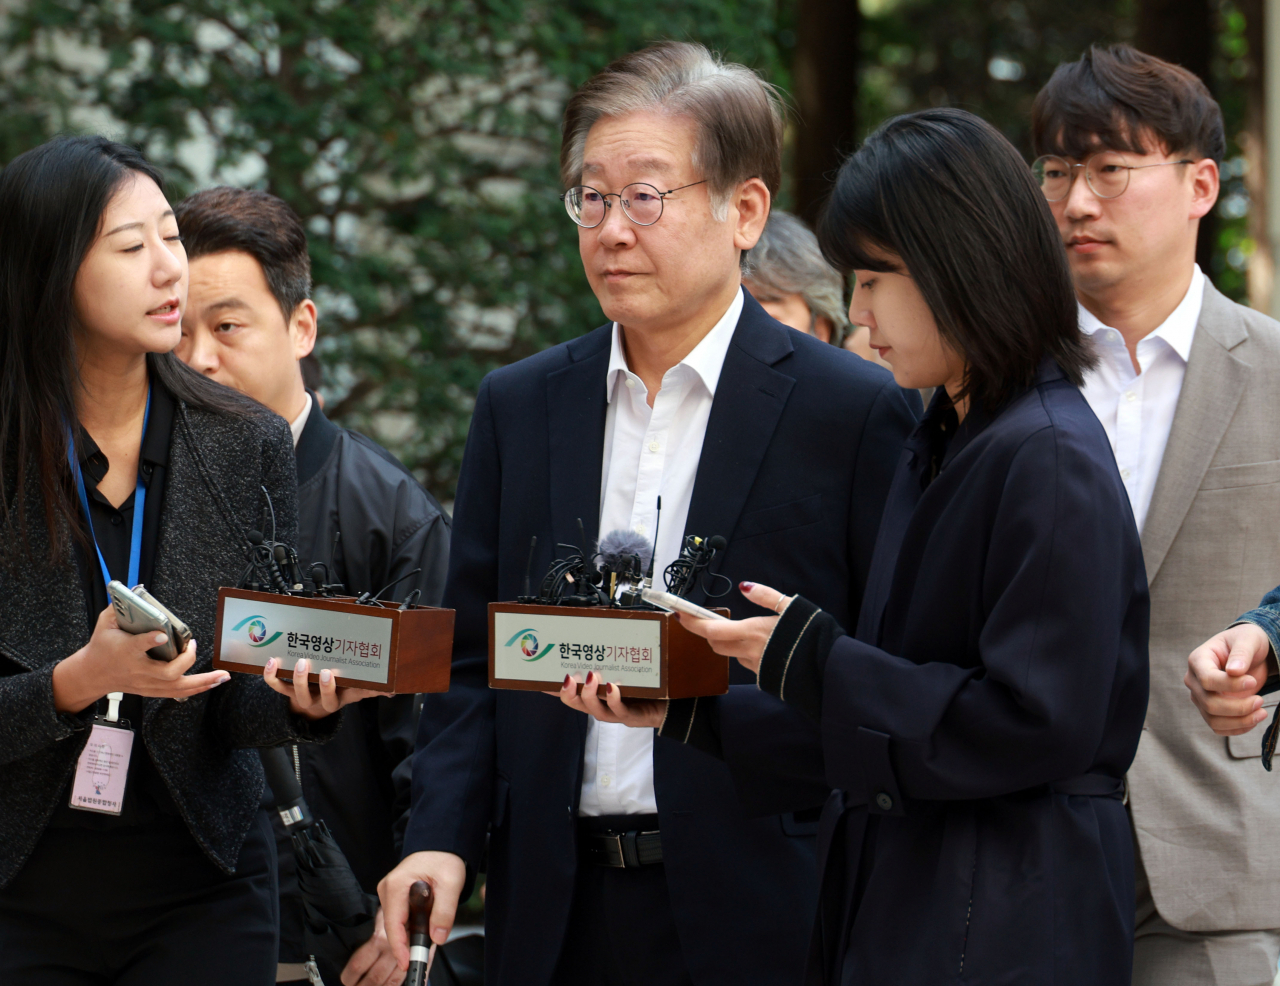 Rep. Lee Jae-myung, chairman of the main opposition Democratic Party, enters the Seoul Central District Court on Friday. (Yonhap)